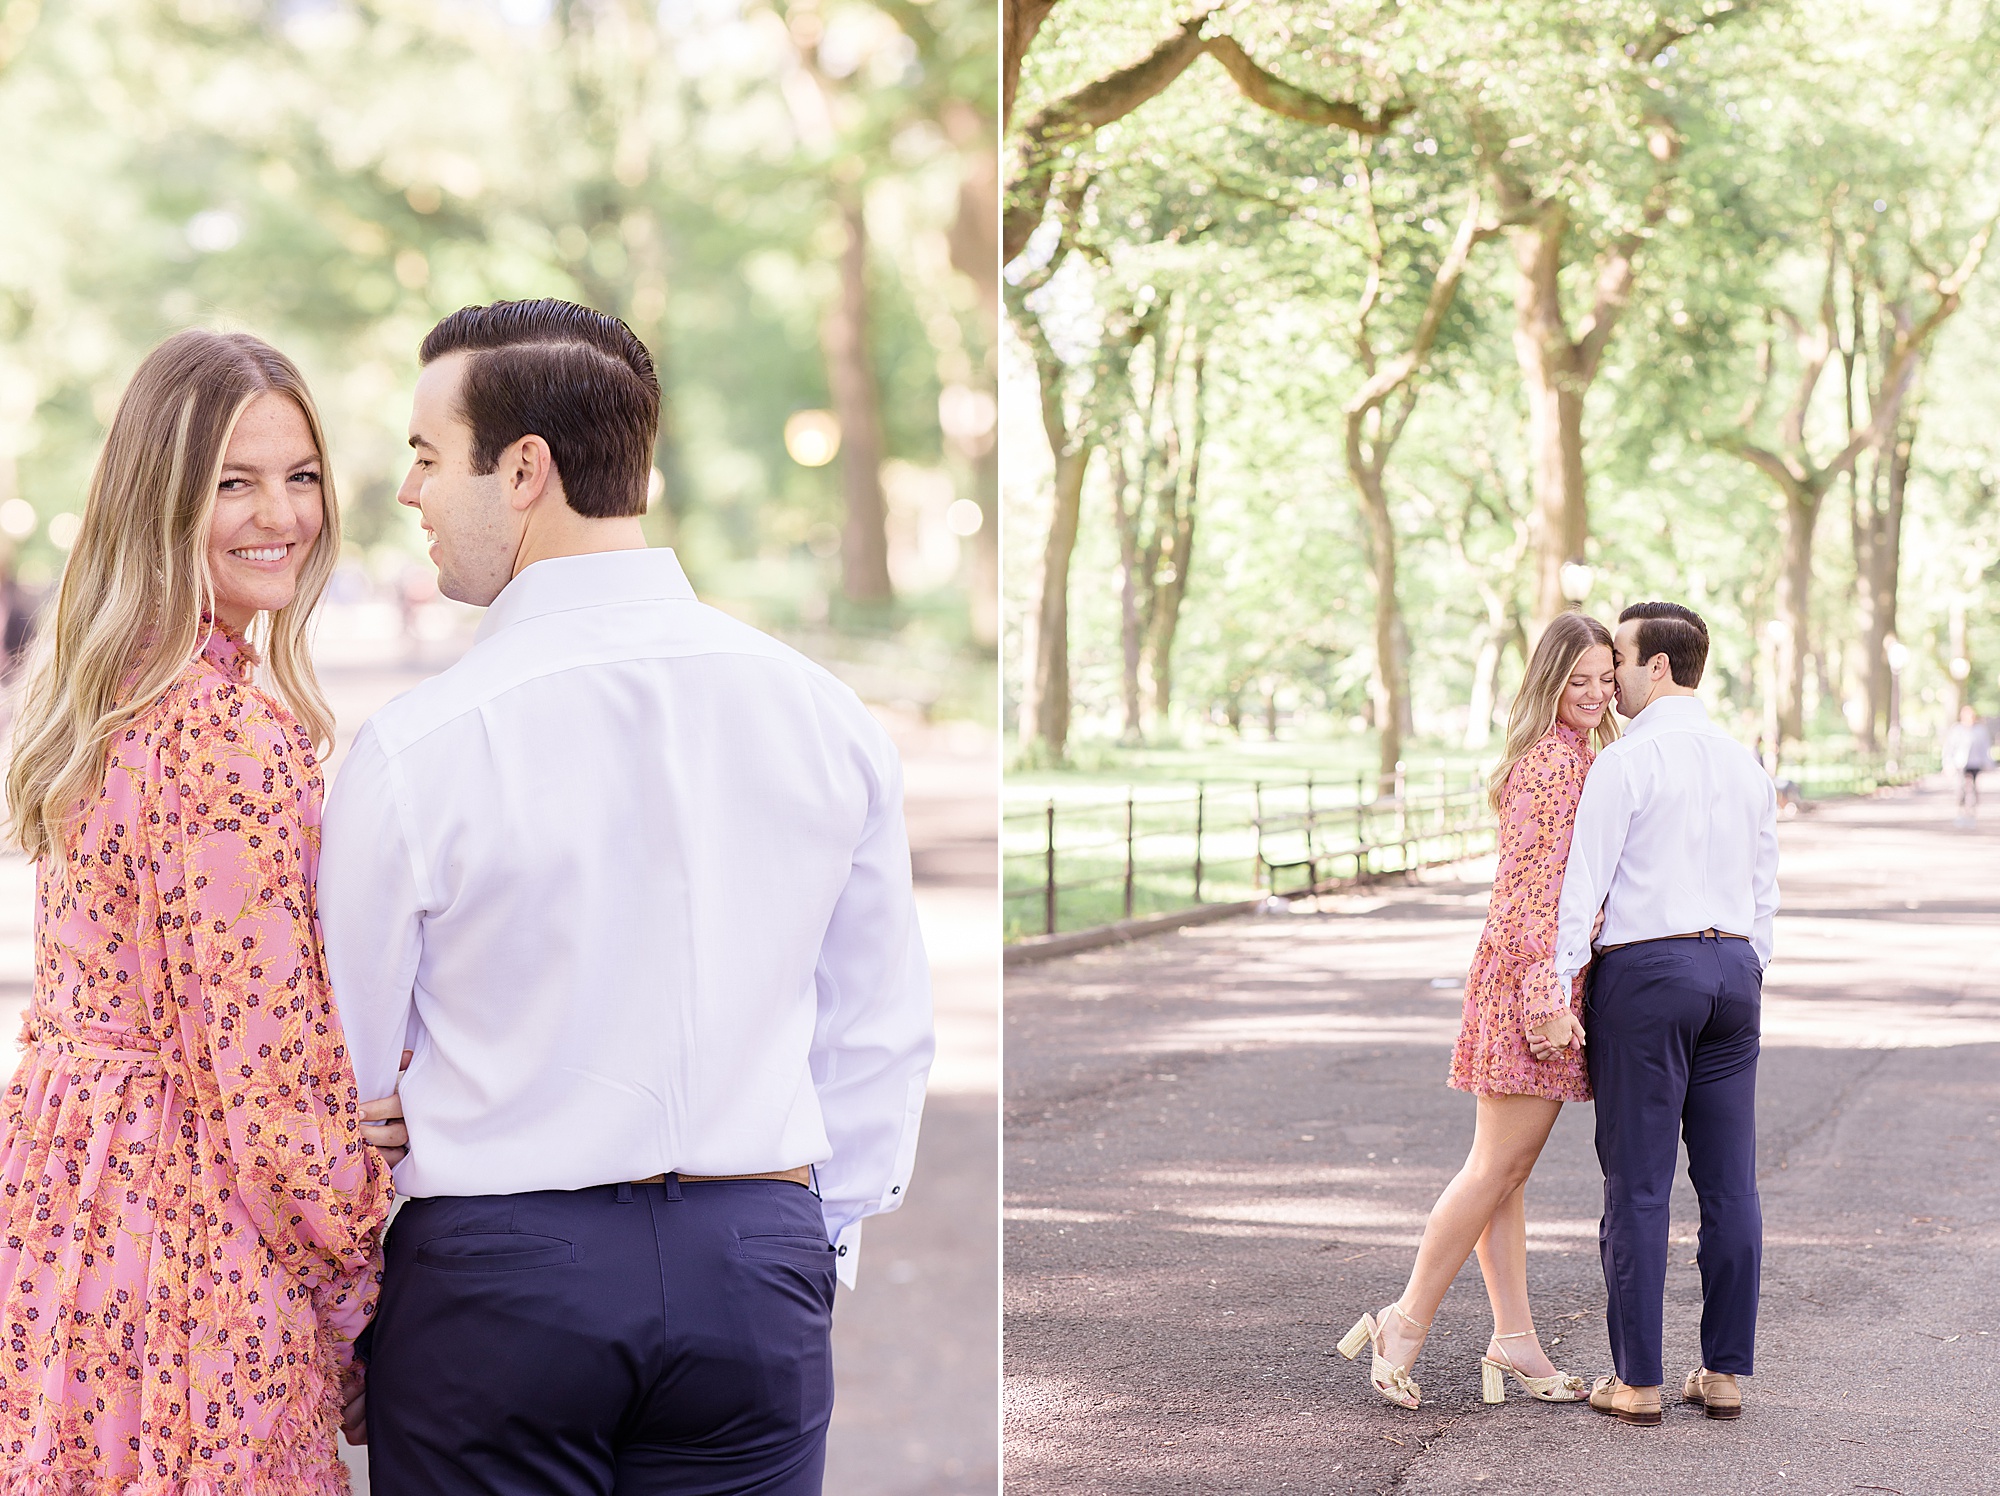 New York City engagement photos for couple in park